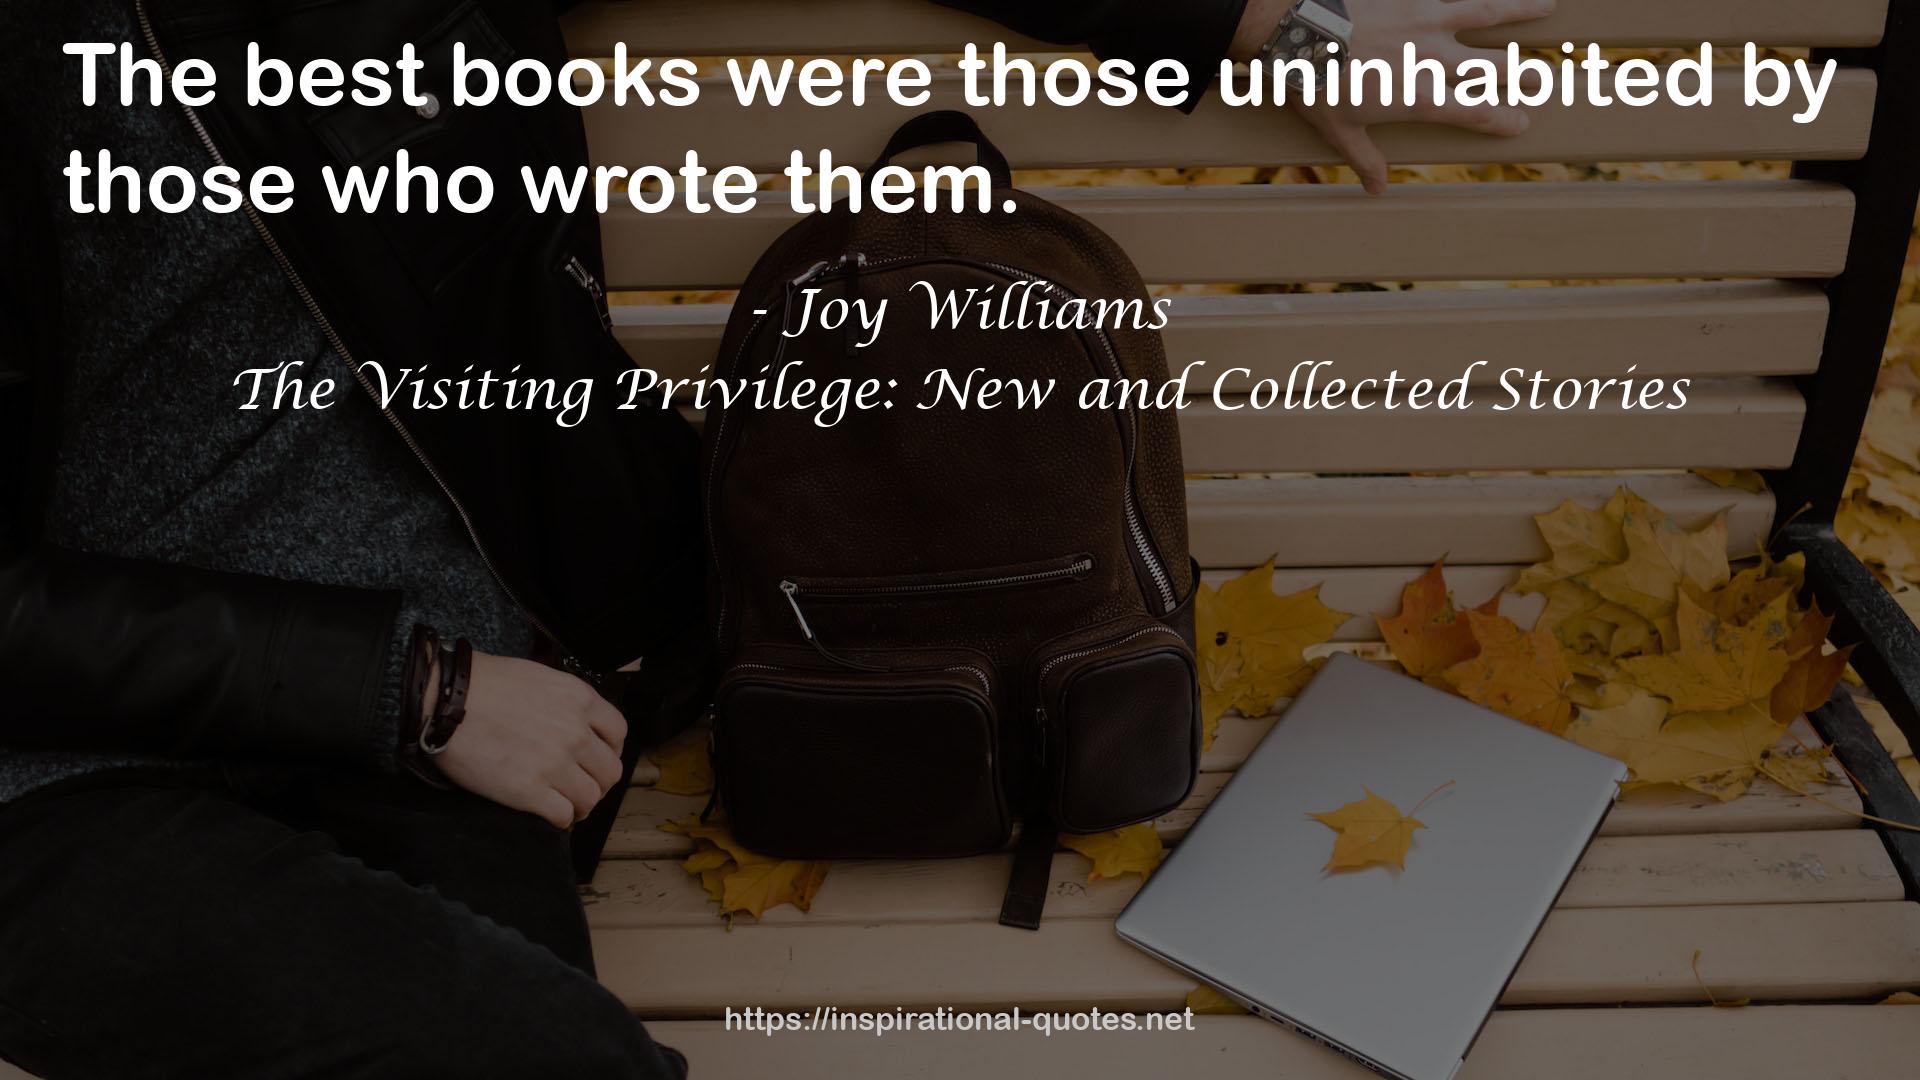 The Visiting Privilege: New and Collected Stories QUOTES